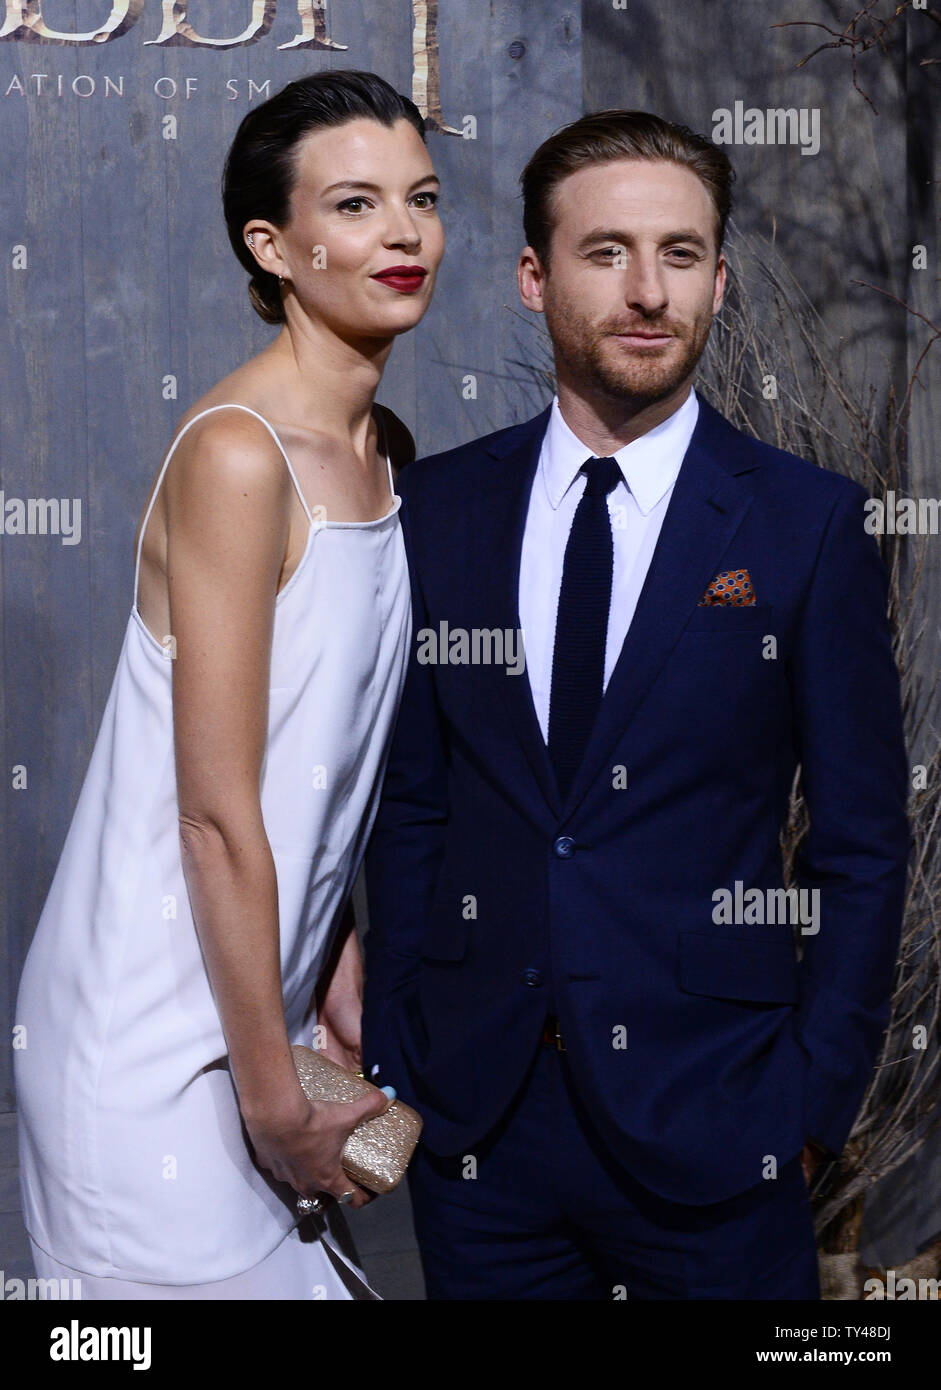 Cast member Dean O'Gorman and his girlfriend Sarah Wilson attend the  premiere of "The Hobbit: The Desolation of Smaug" at TCL Chinese Theatre in  the Hollywood section of Los Angeles on December